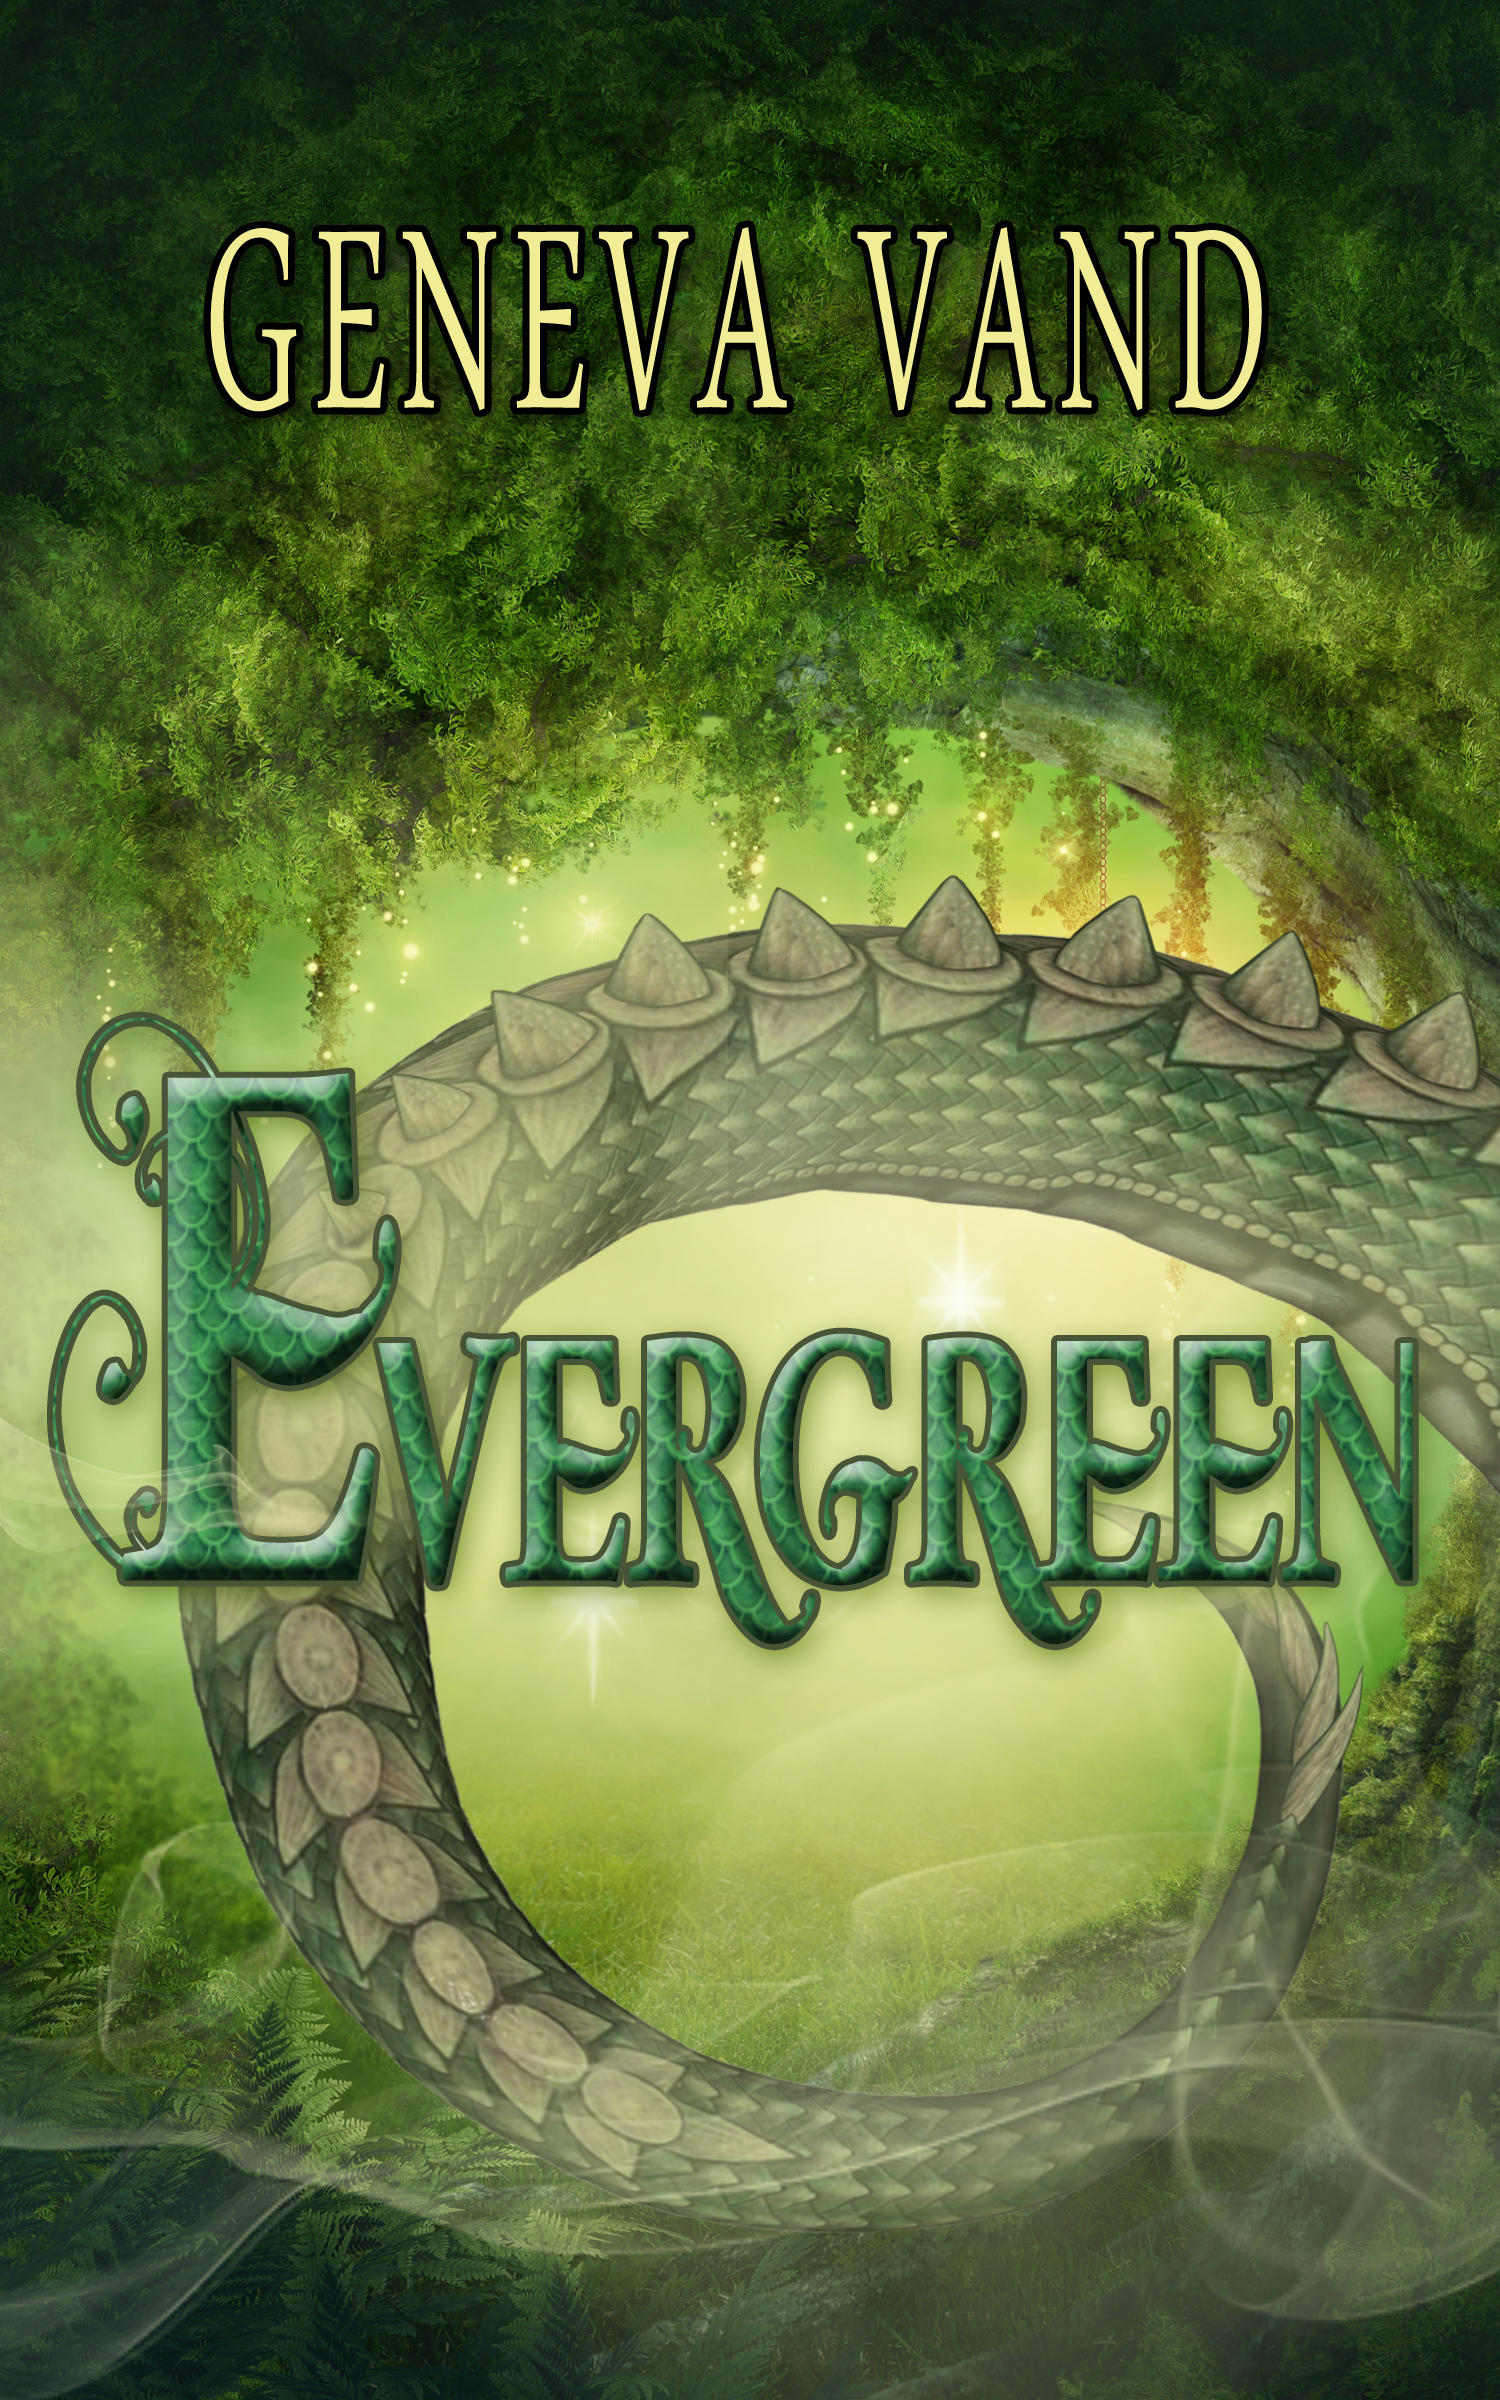 Cover image for Evergreen by Geneva Vand